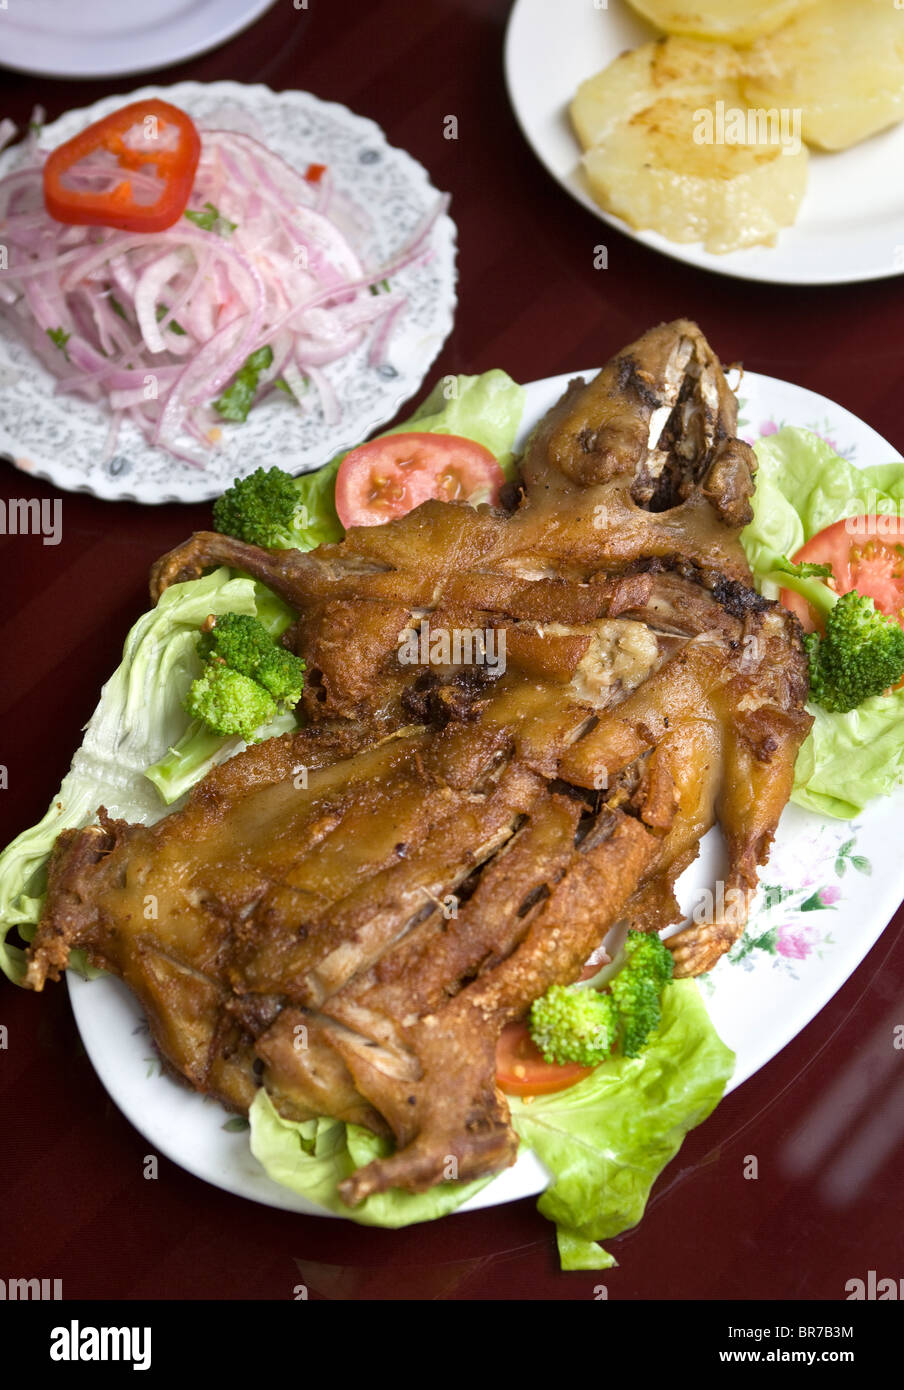 Roast Cuy or Guinea Pig served in a restaurant in Lima Peru -  An example of the strange or weird food eaten by people around the world Stock Photo